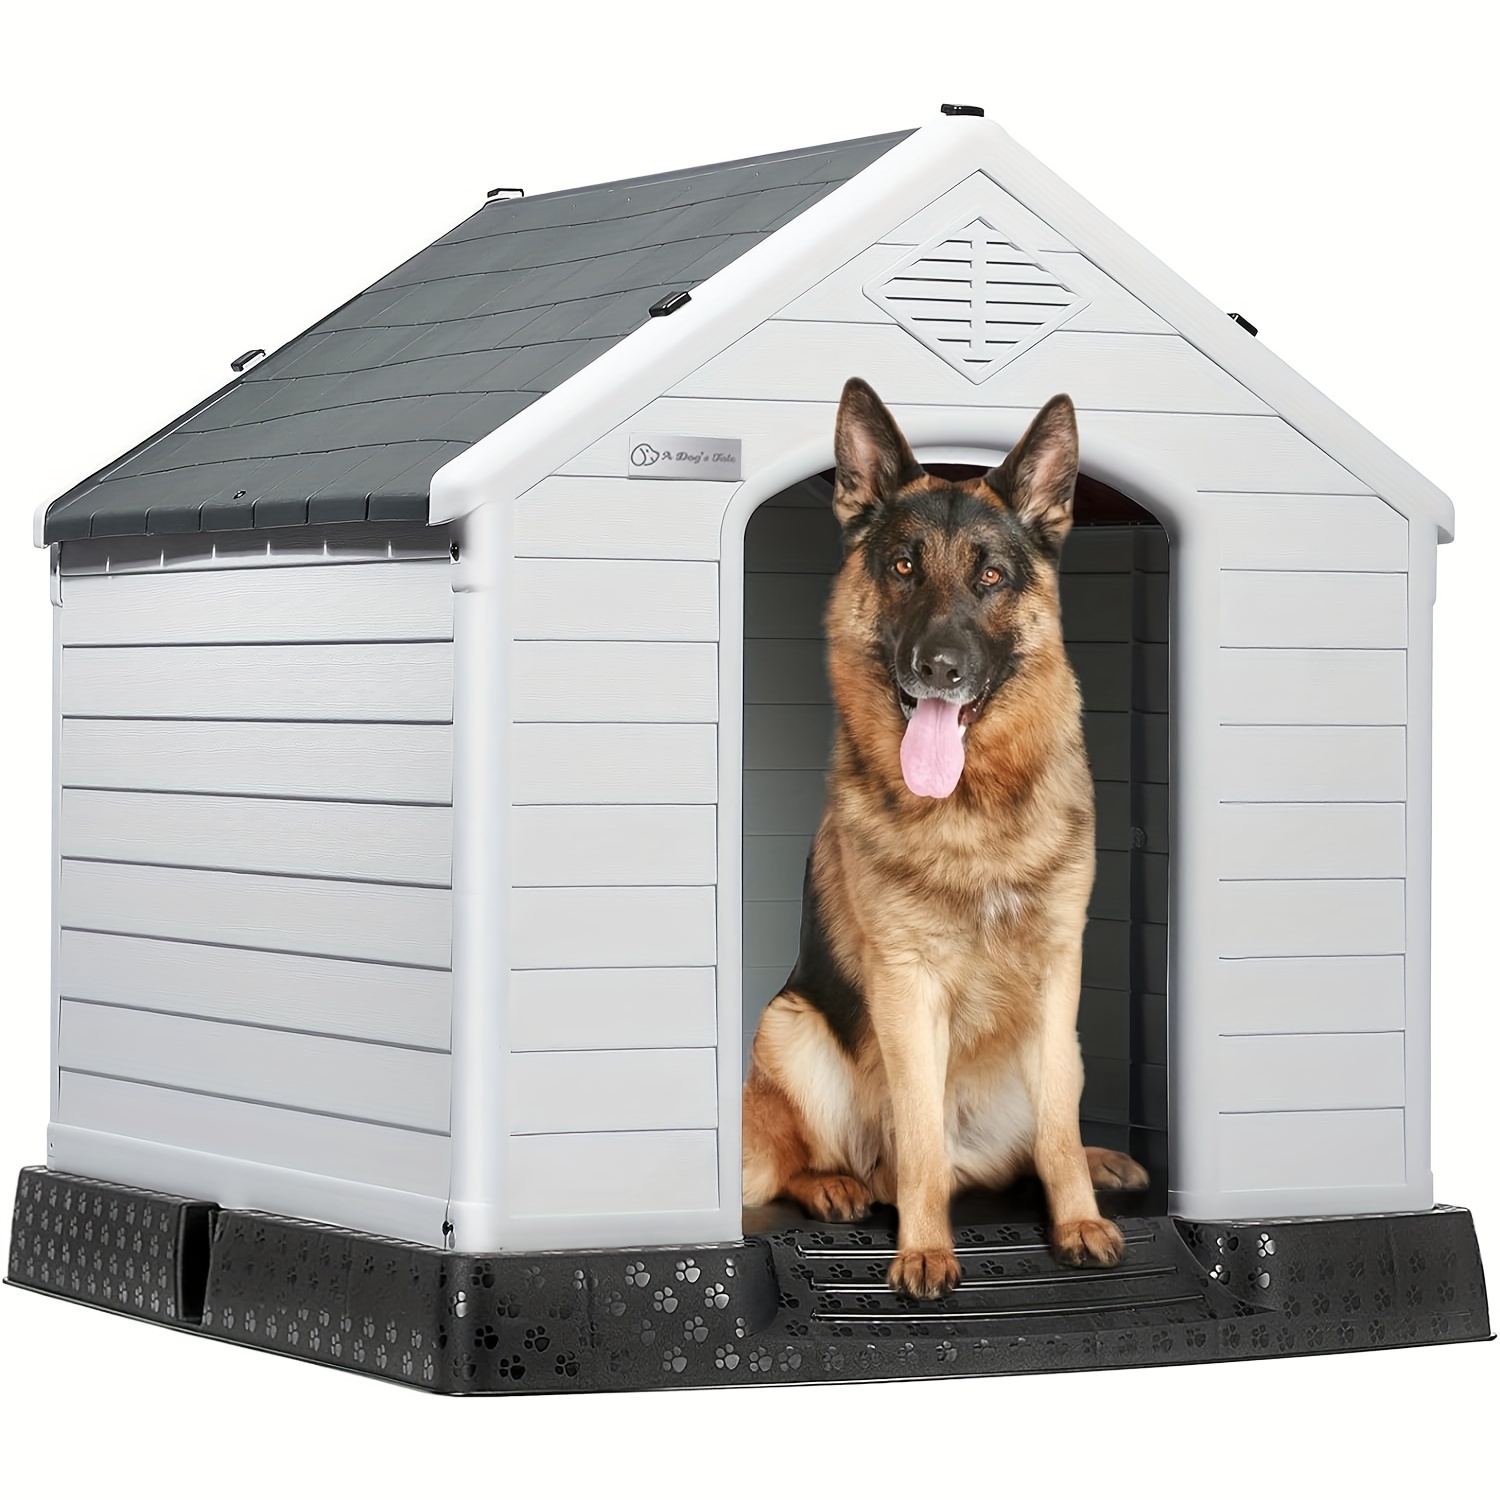 

Durable Waterproof Plastic Dog House For Small To Large Sized Dogs, Indoor Outdoor Doghouse Insulated Puppy Shelter With Elevated Floor, Easy To Assemble (34''l*31''w*32''h)